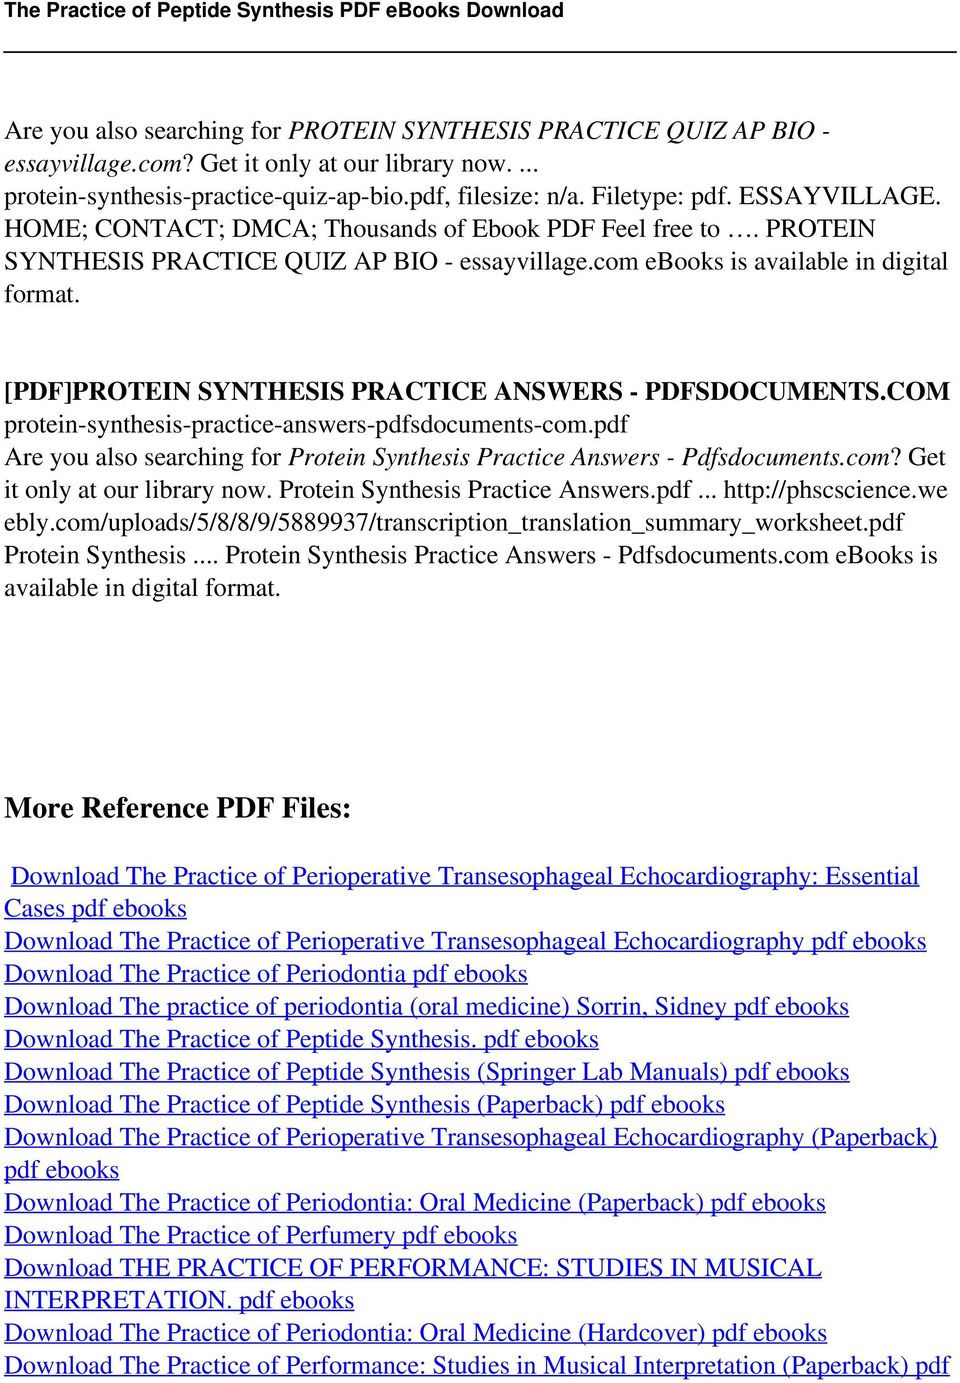 Transcription and Translation Practice Worksheet the Practice Of Peptide Synthesis Pdf Free Download